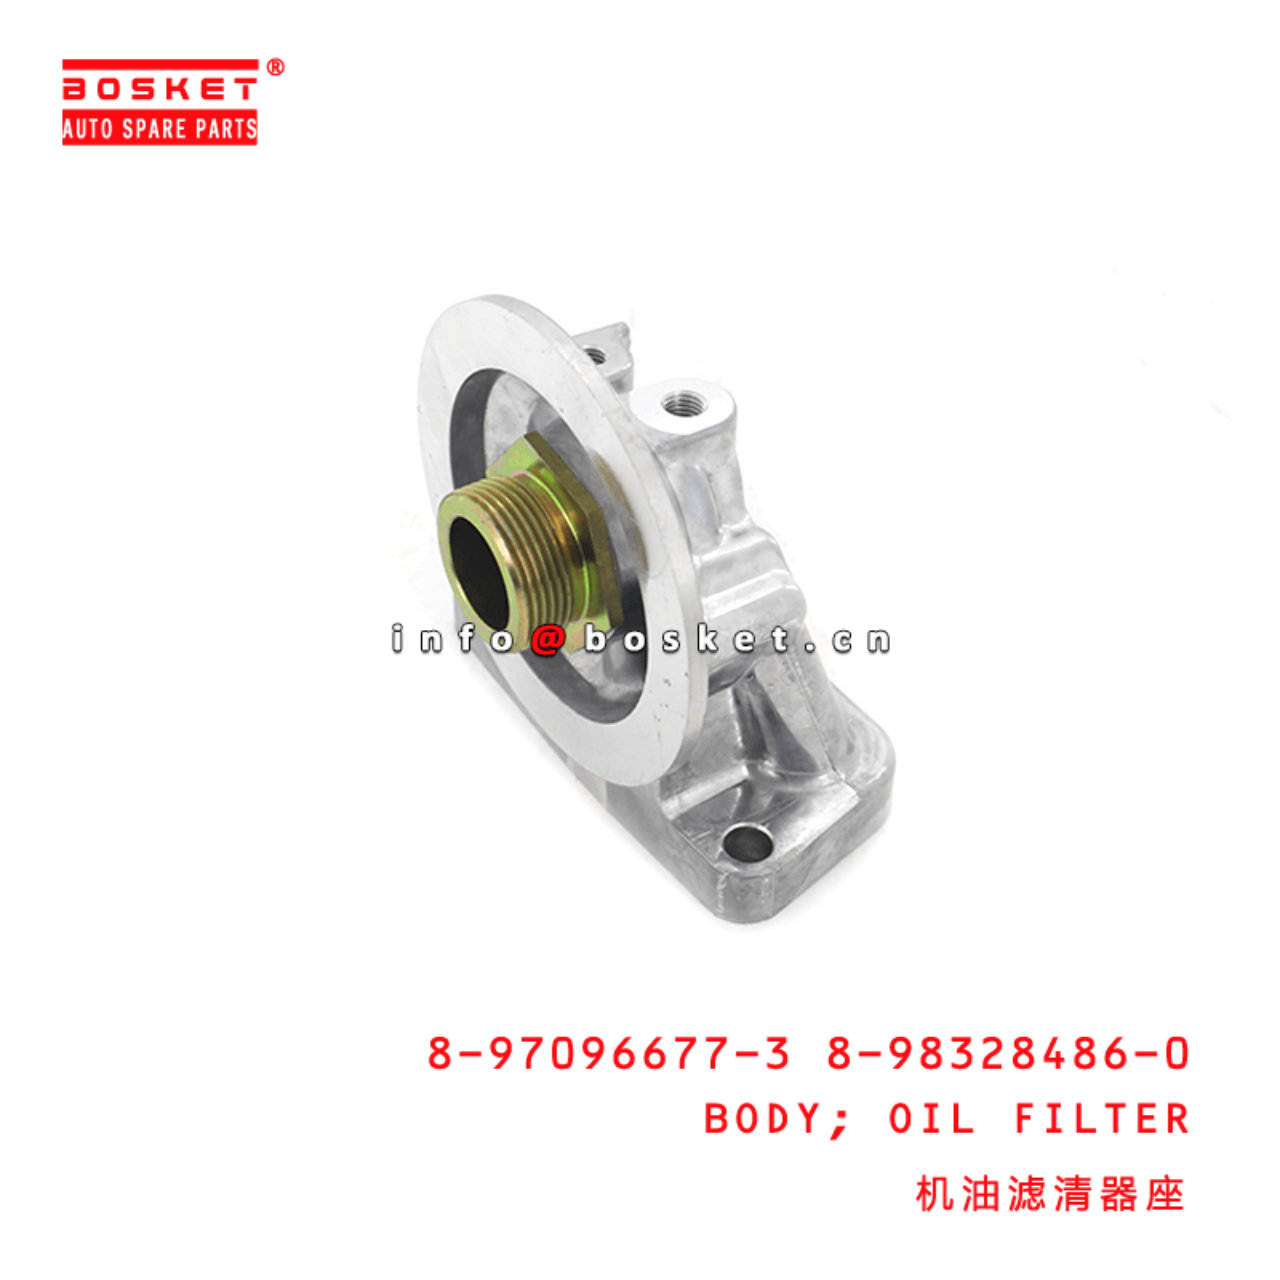 8-97096677-3 8-98328486-0 8970966773 8983284860 Oil Filter Body Suitable for ISUZU 700P 4HG1 4HF1